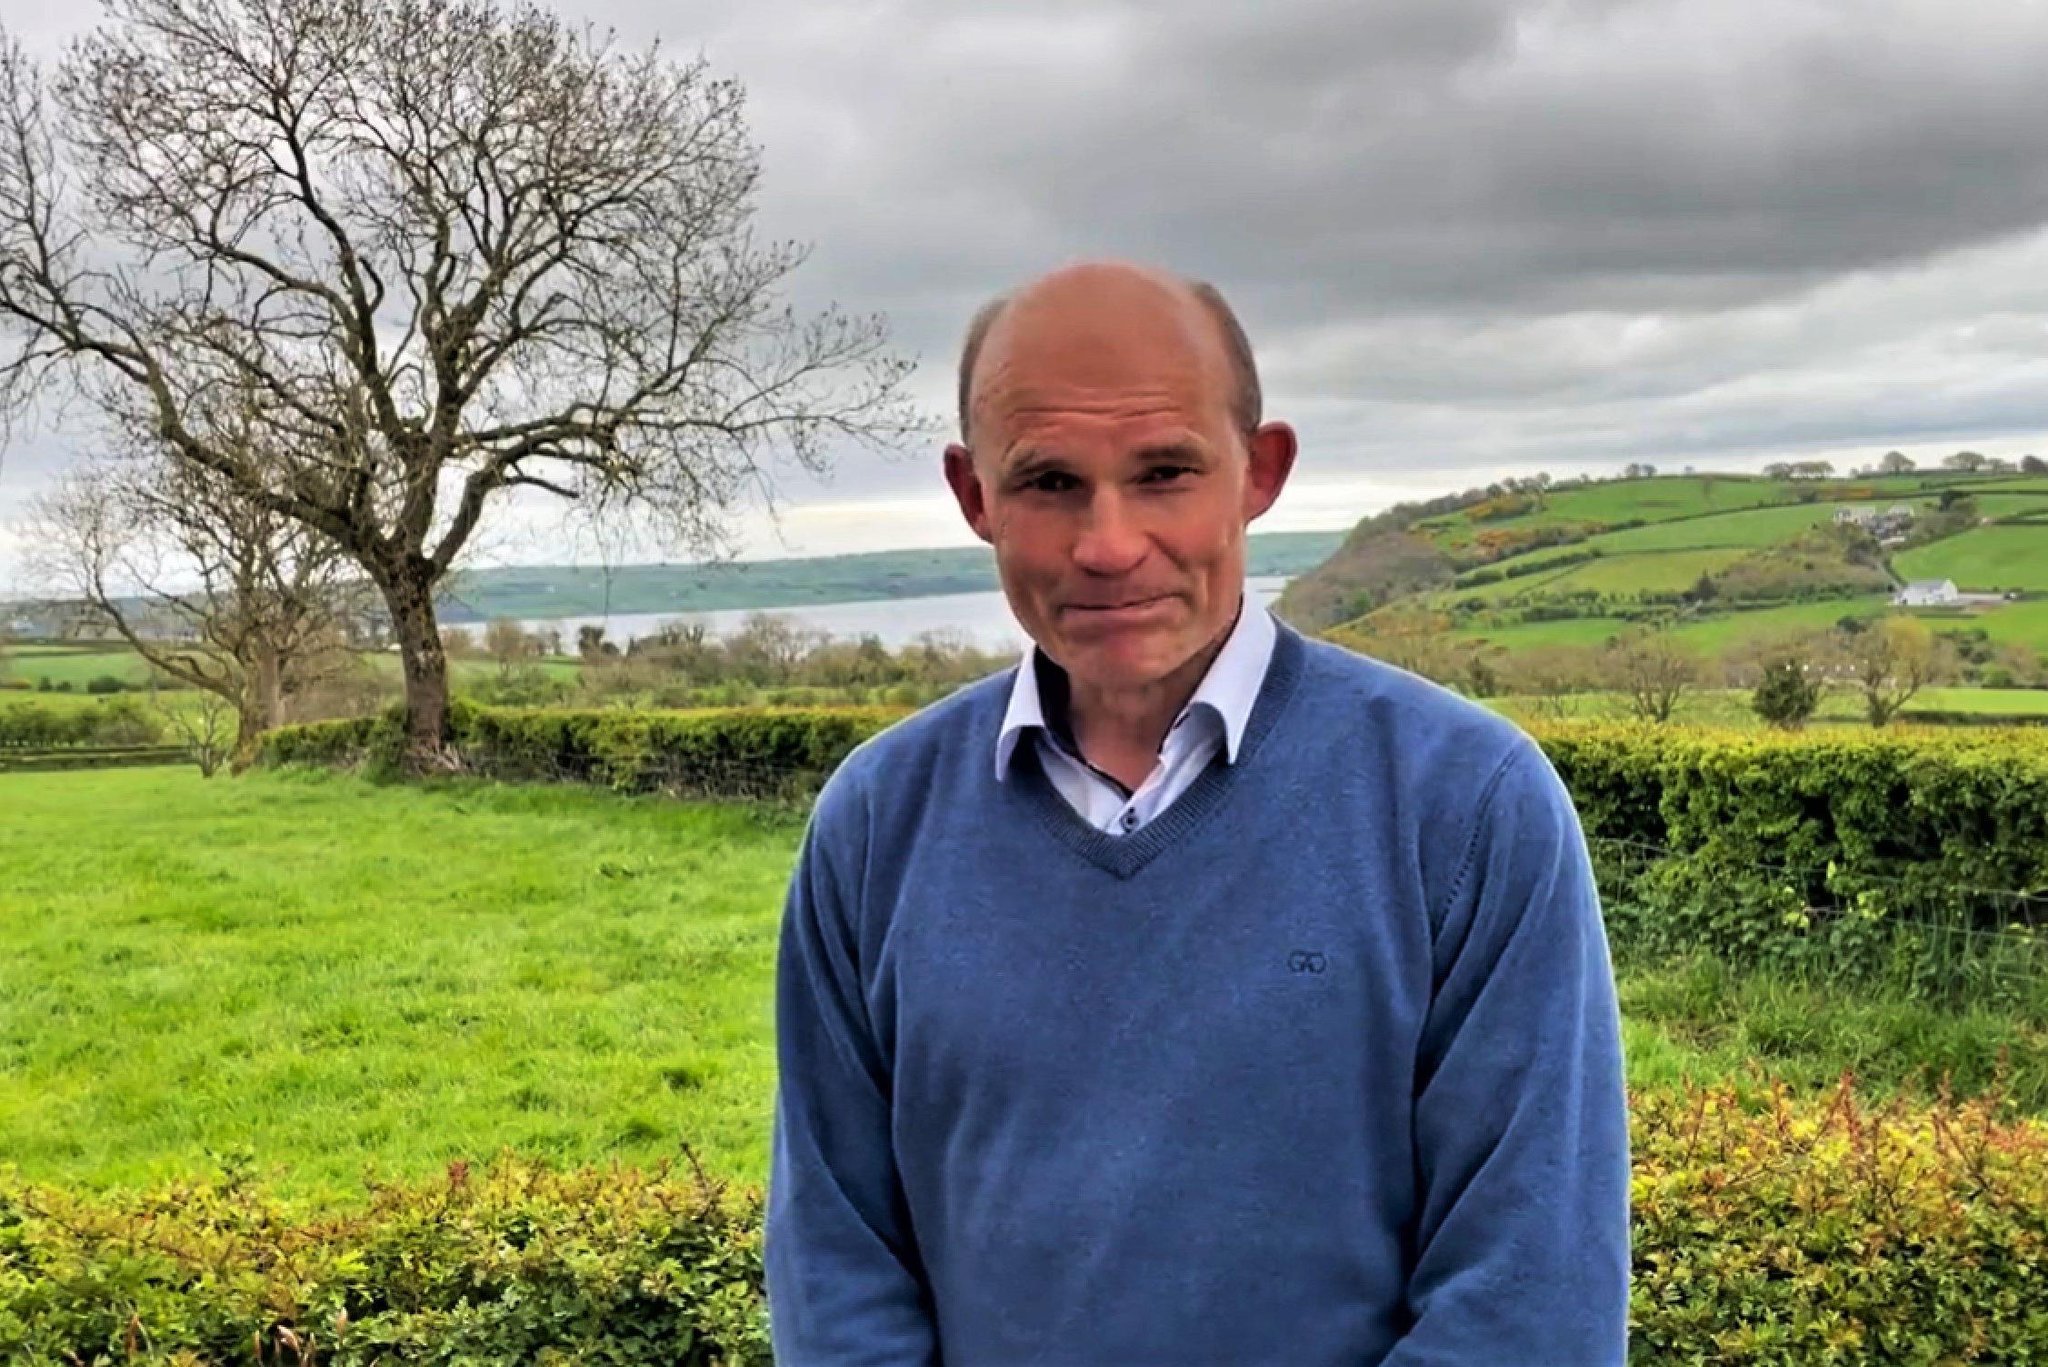 ELECTION 2022: East Antrim – The Beggs dynasty comes crashing down after four decades&#8230; but colleague touts a comeback